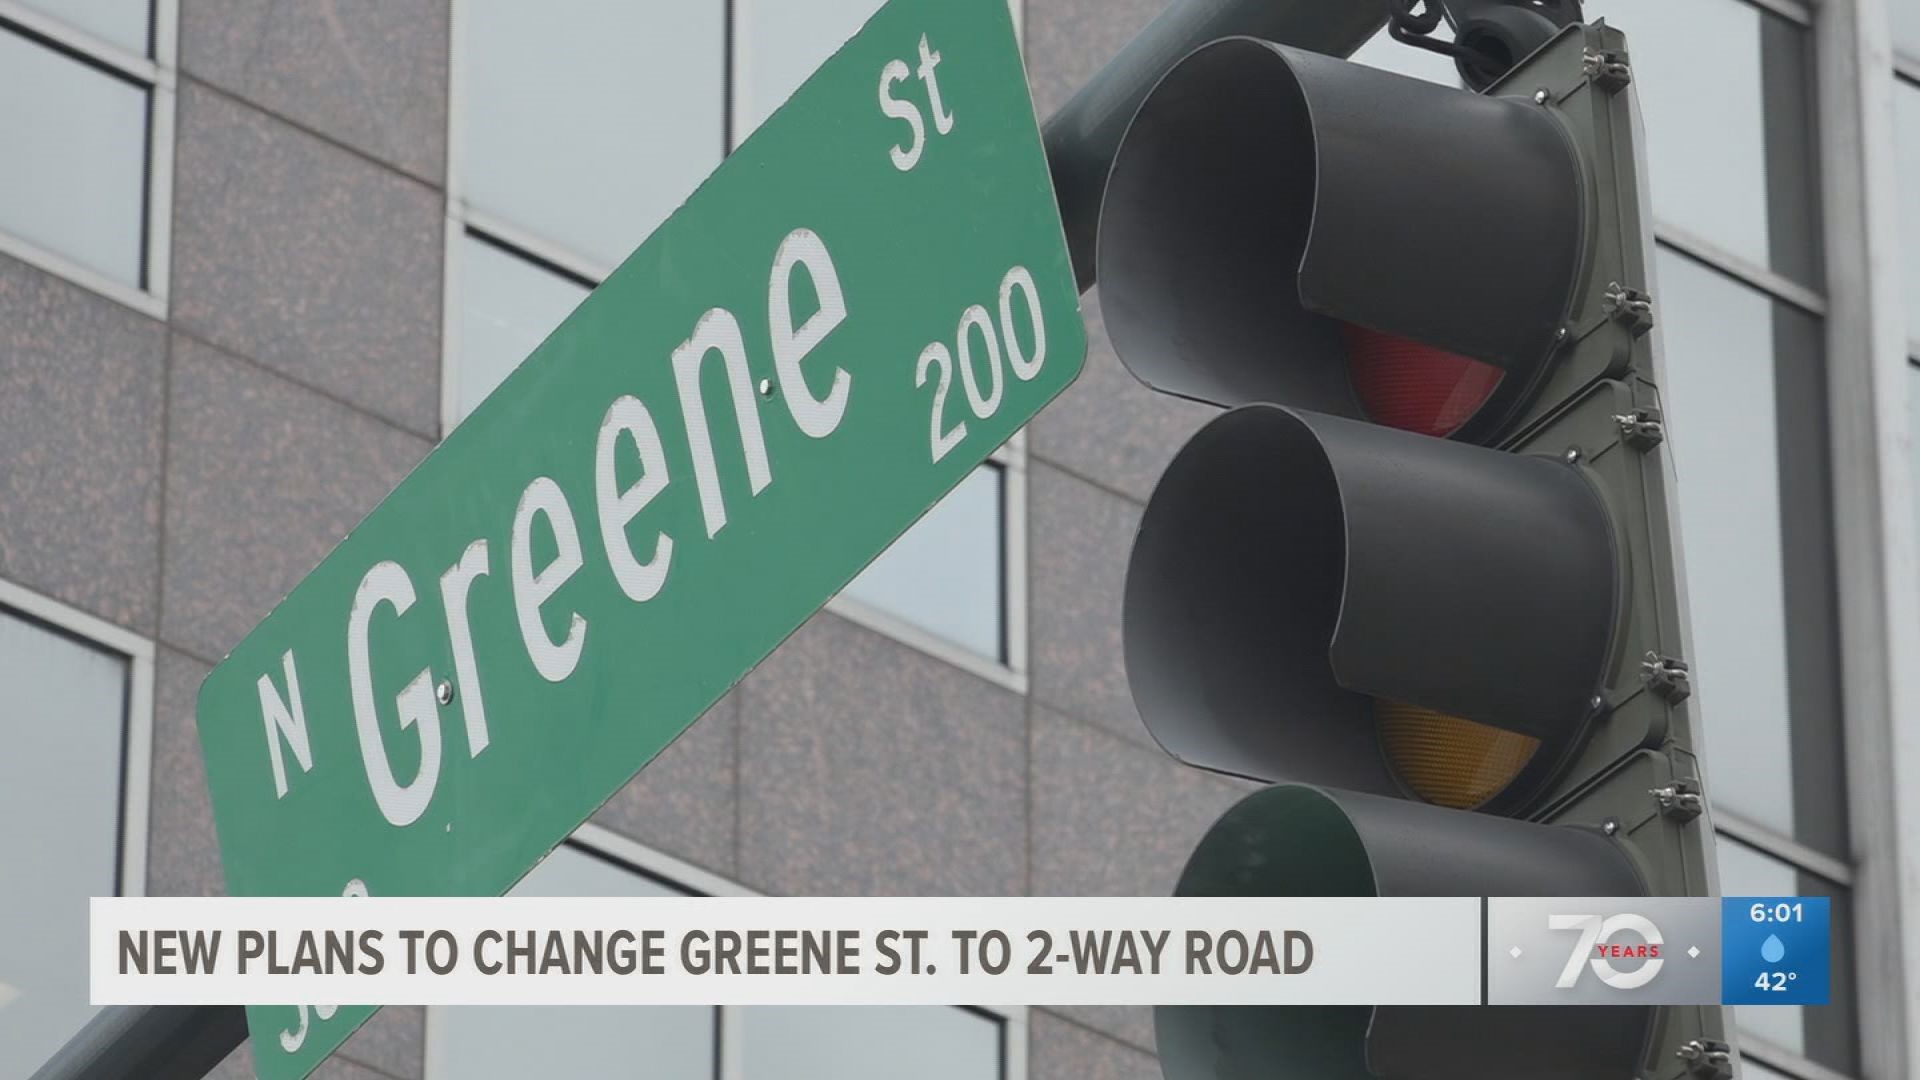 Downtown Greensboro businesses could flourish after city decides to change Greene Street to a two way road.